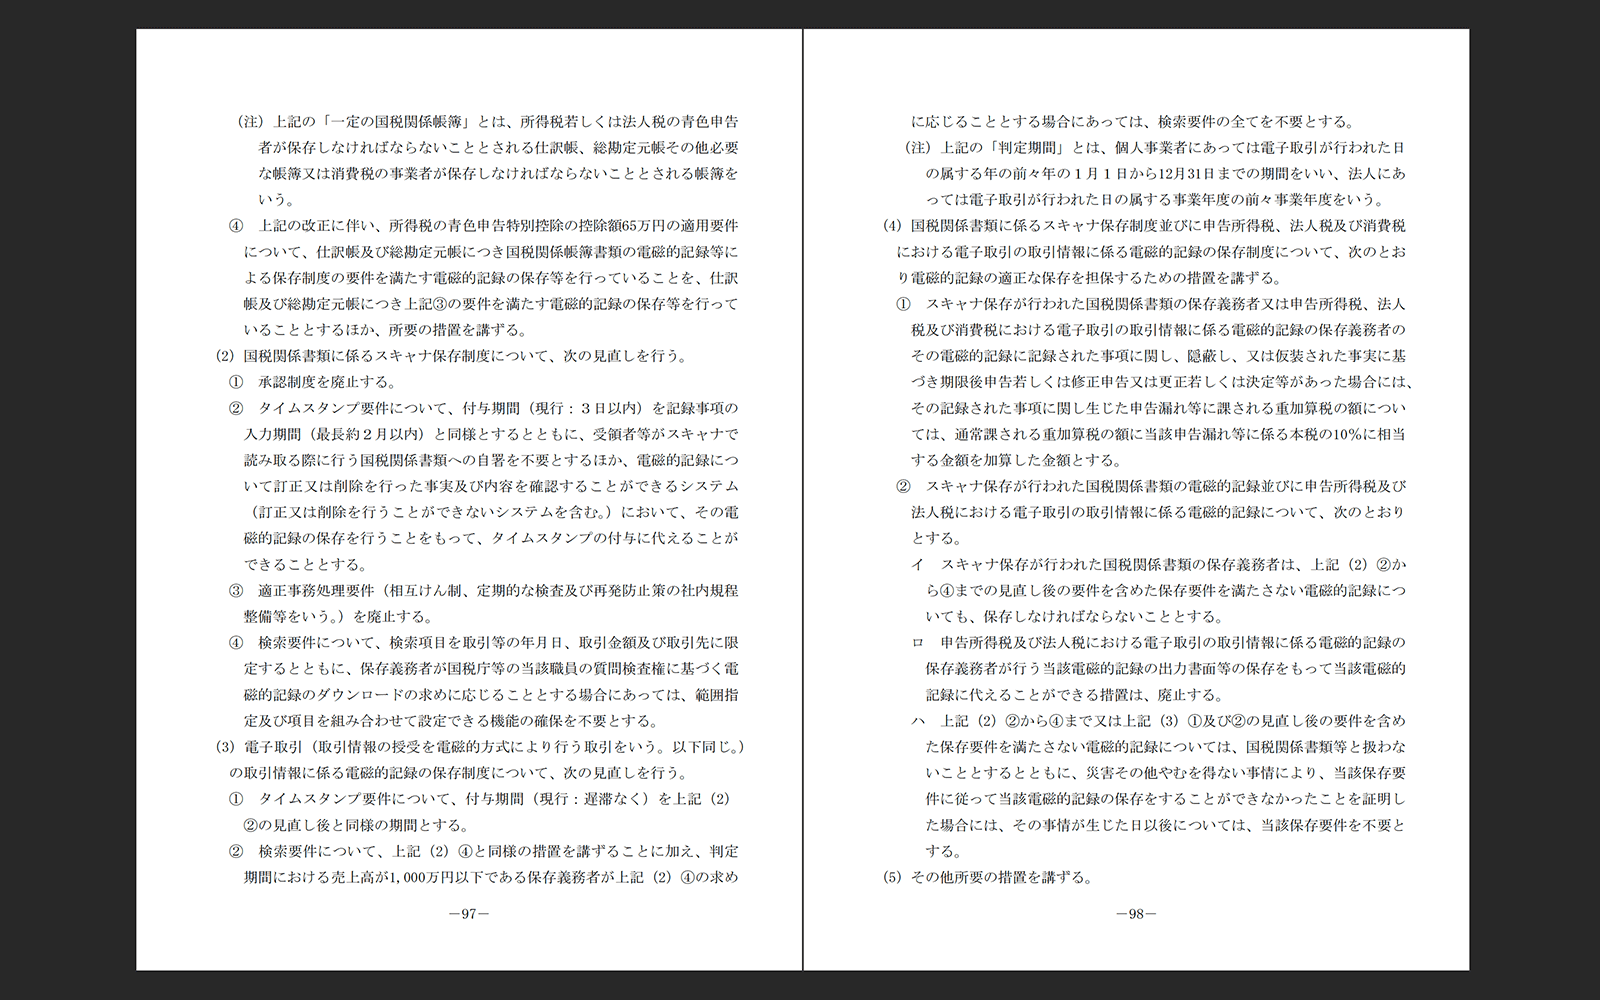 https://www.mof.go.jp/tax_policy/tax_reform/outline/fy2021/20201221taikou.pdf 2021年1月21日最終アクセス